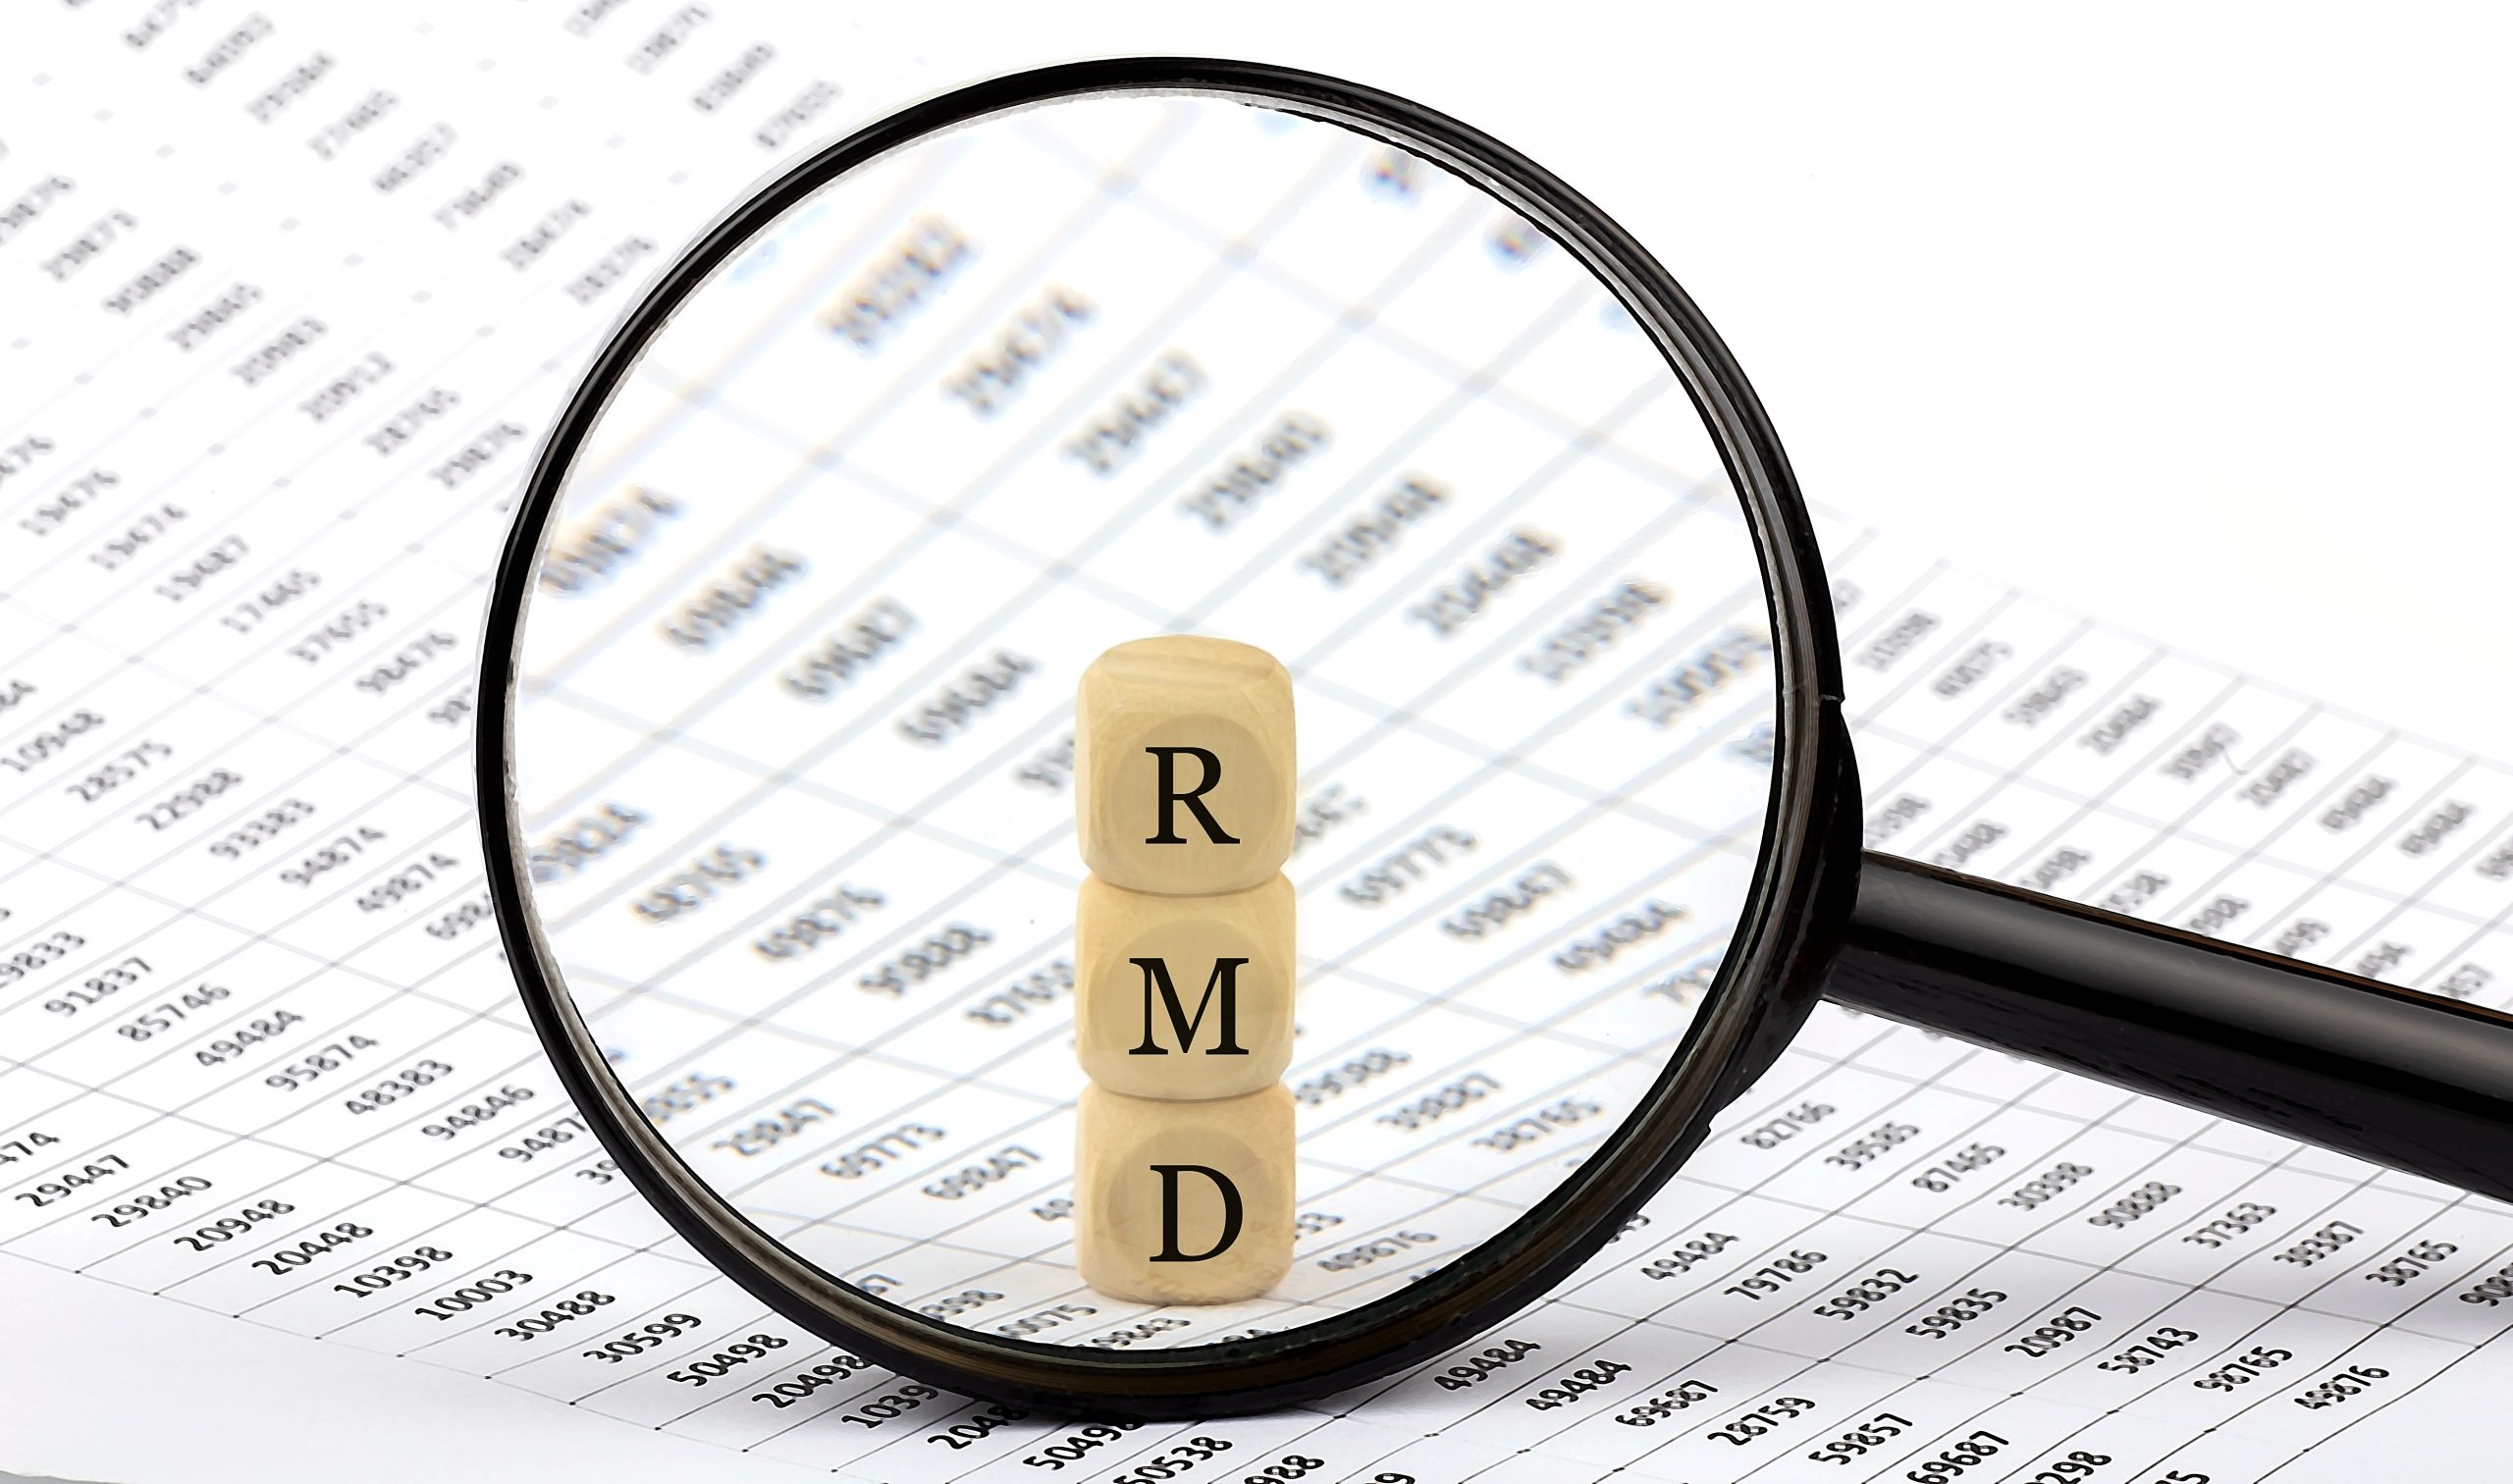 Confusion Reigns Over New RMD Rules. We Have the Answers.